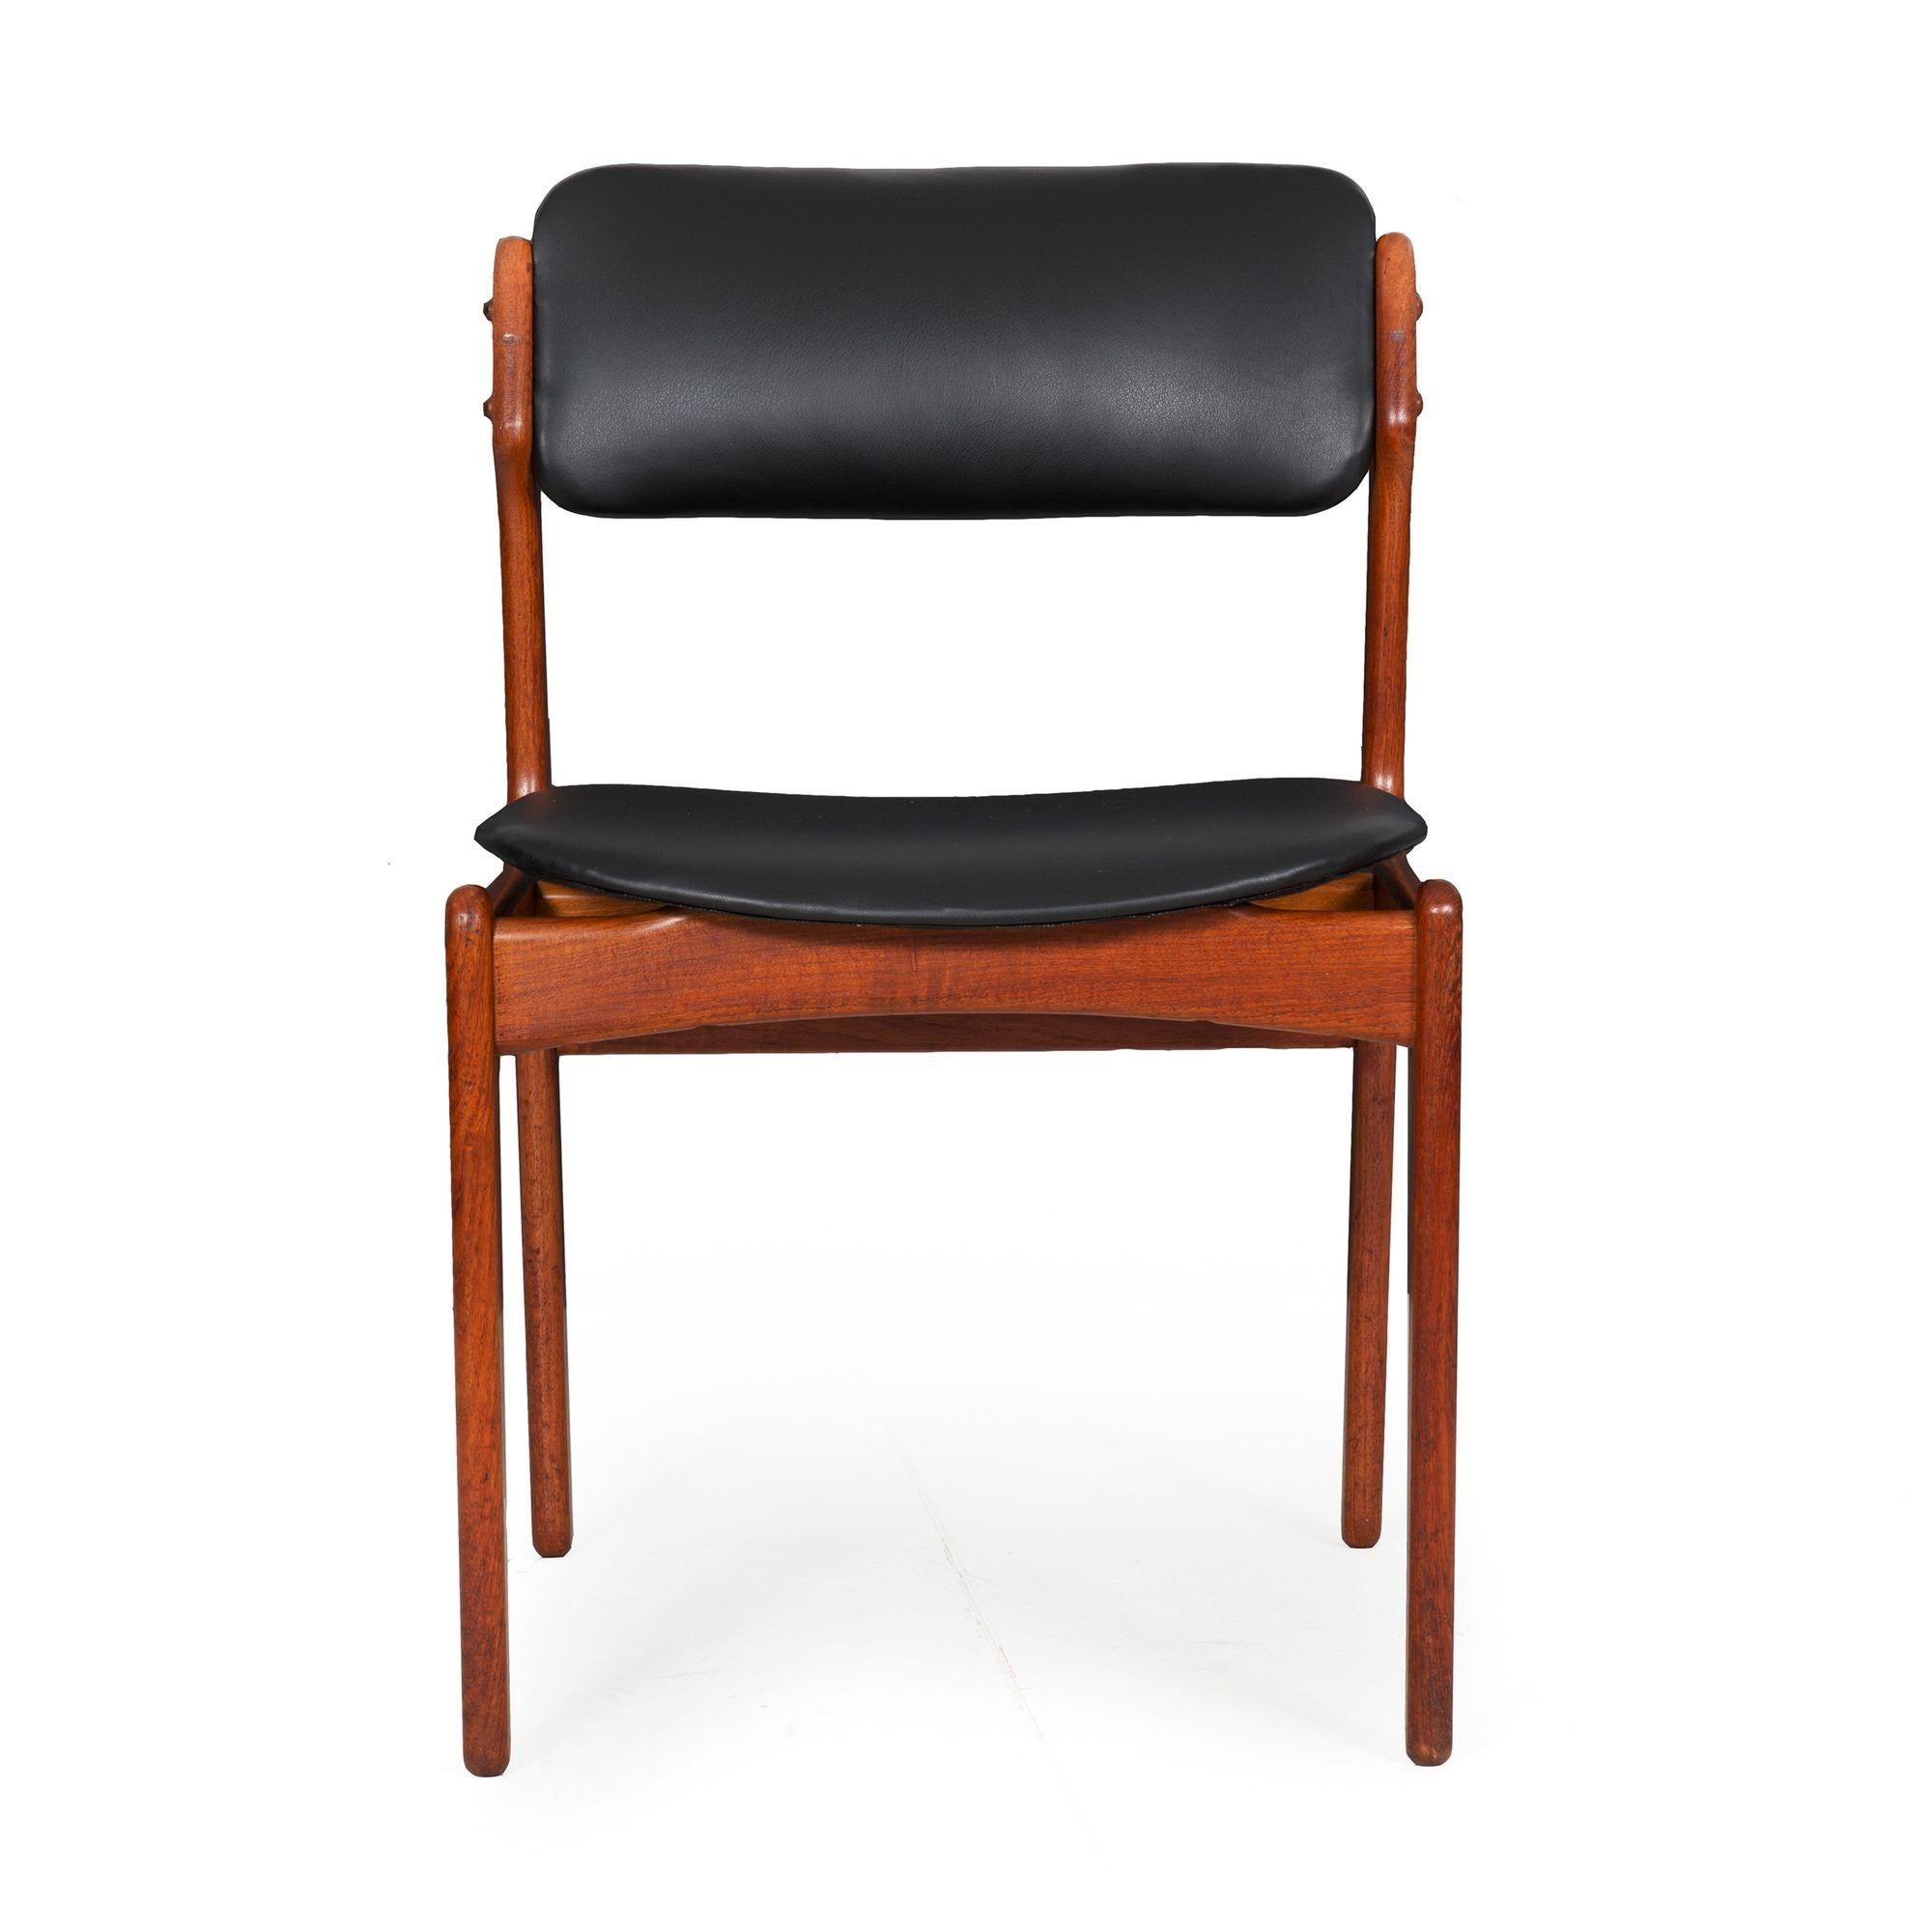 DANISH MODERN TEAK & BLACK LEATHER MODEL OD-49 SIDE CHAIR
By Erik Buch for O.D. Møbler  Denmark, circa 1980s
Item # 202XHQ13L 

An iconic chair to the period, Erik Buch's 